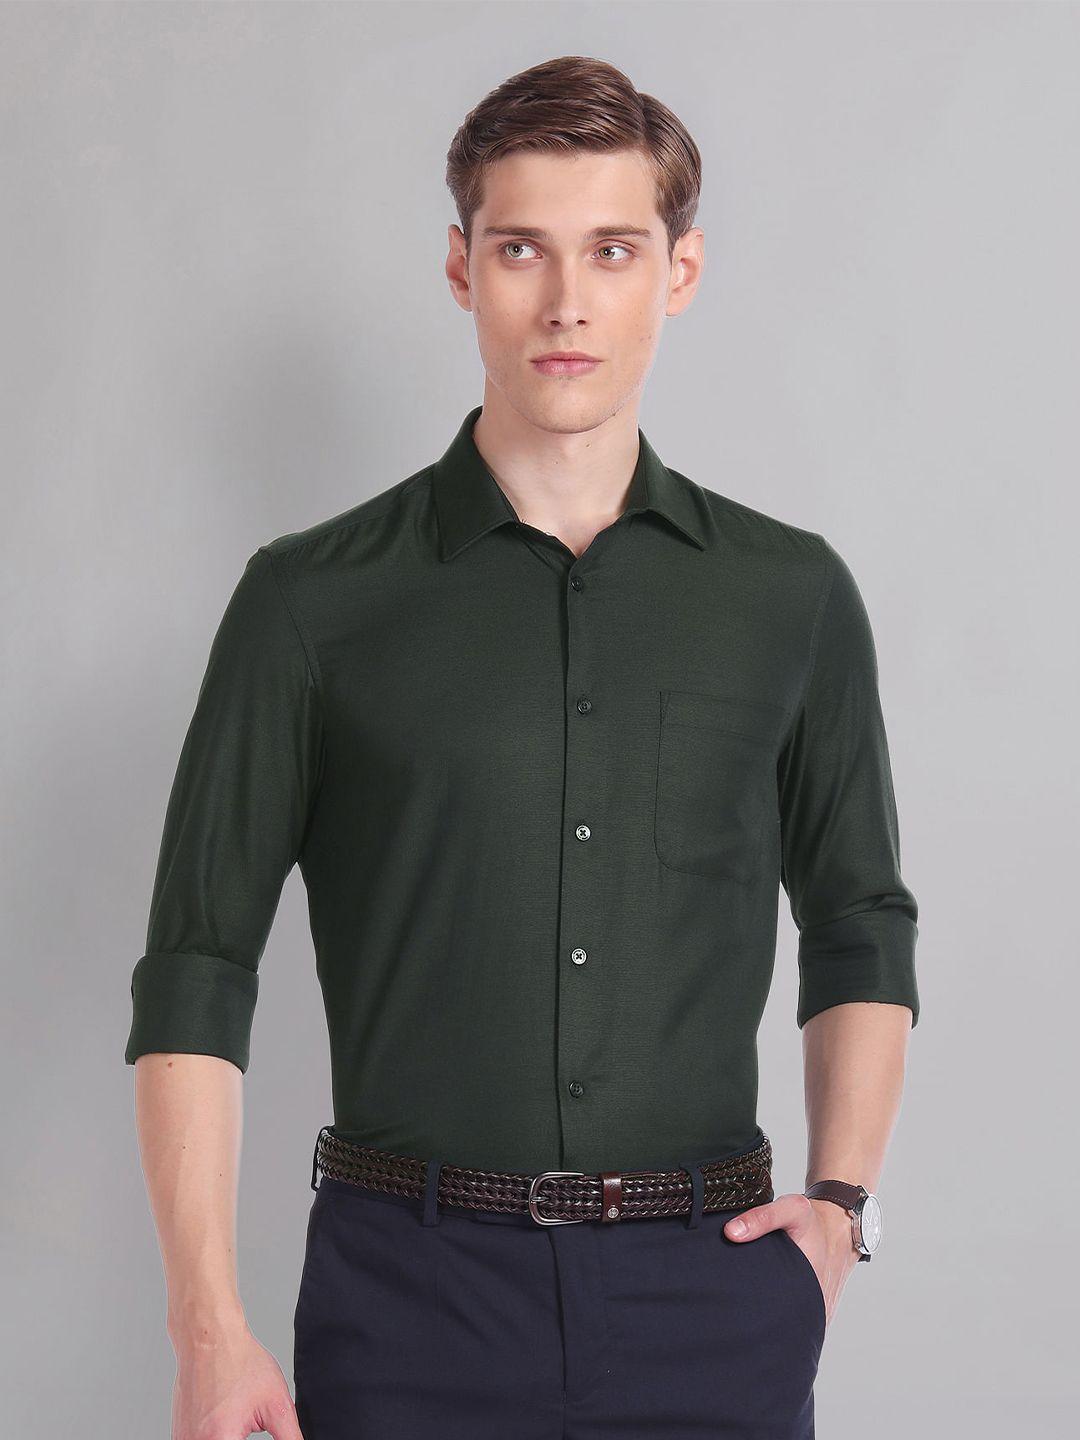 ad by arvind classic casual shirt